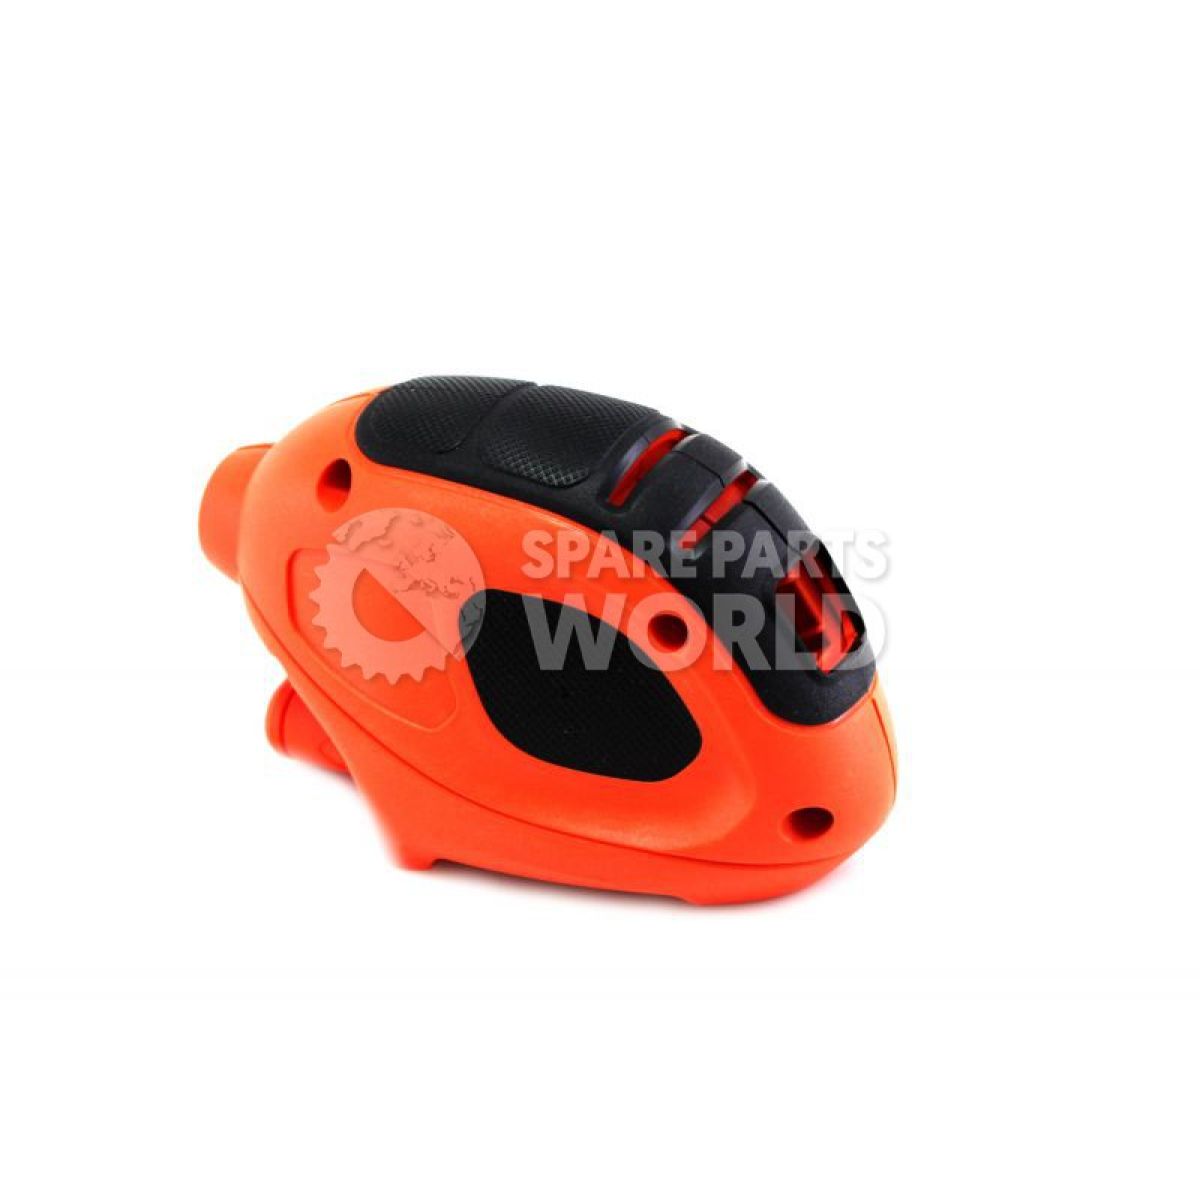 https://toolsandpartsdirect.co.uk/image-factory/739df36146a17d0c46a138ddc17f23bffa664036~1200x1200/images/products/MeOhq9PAS4r2R0htSi8IPE5ET6gl6LGveYPwnEgF.jpg